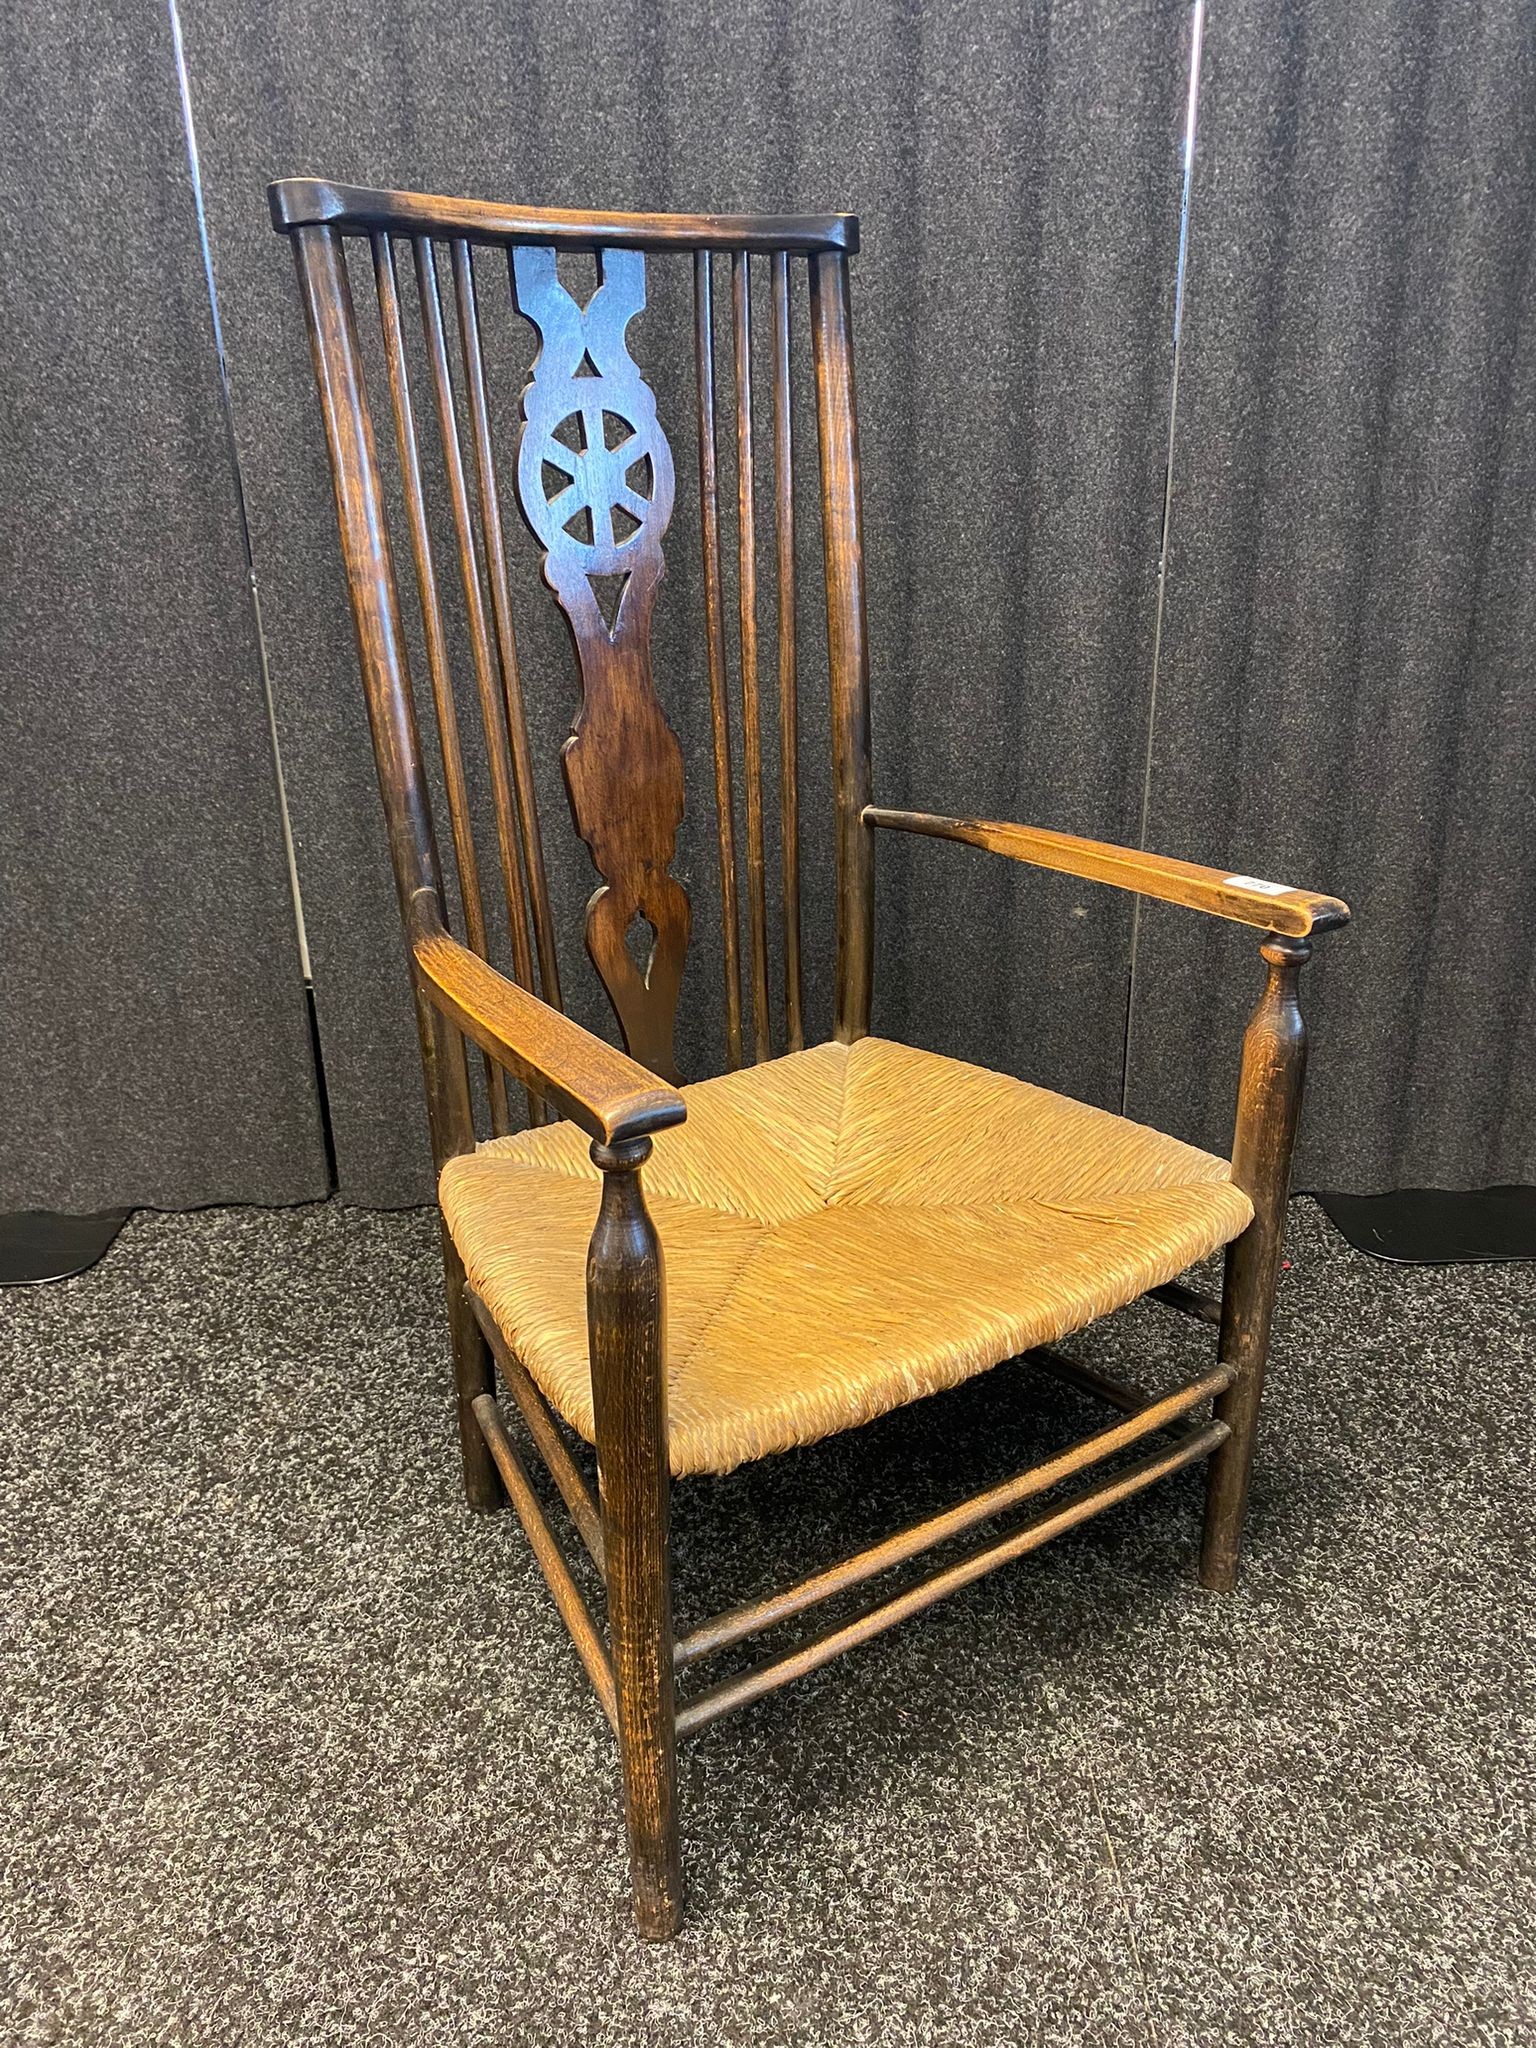 Arts & Crafts chair, weaved seat, turned legs [87cm]